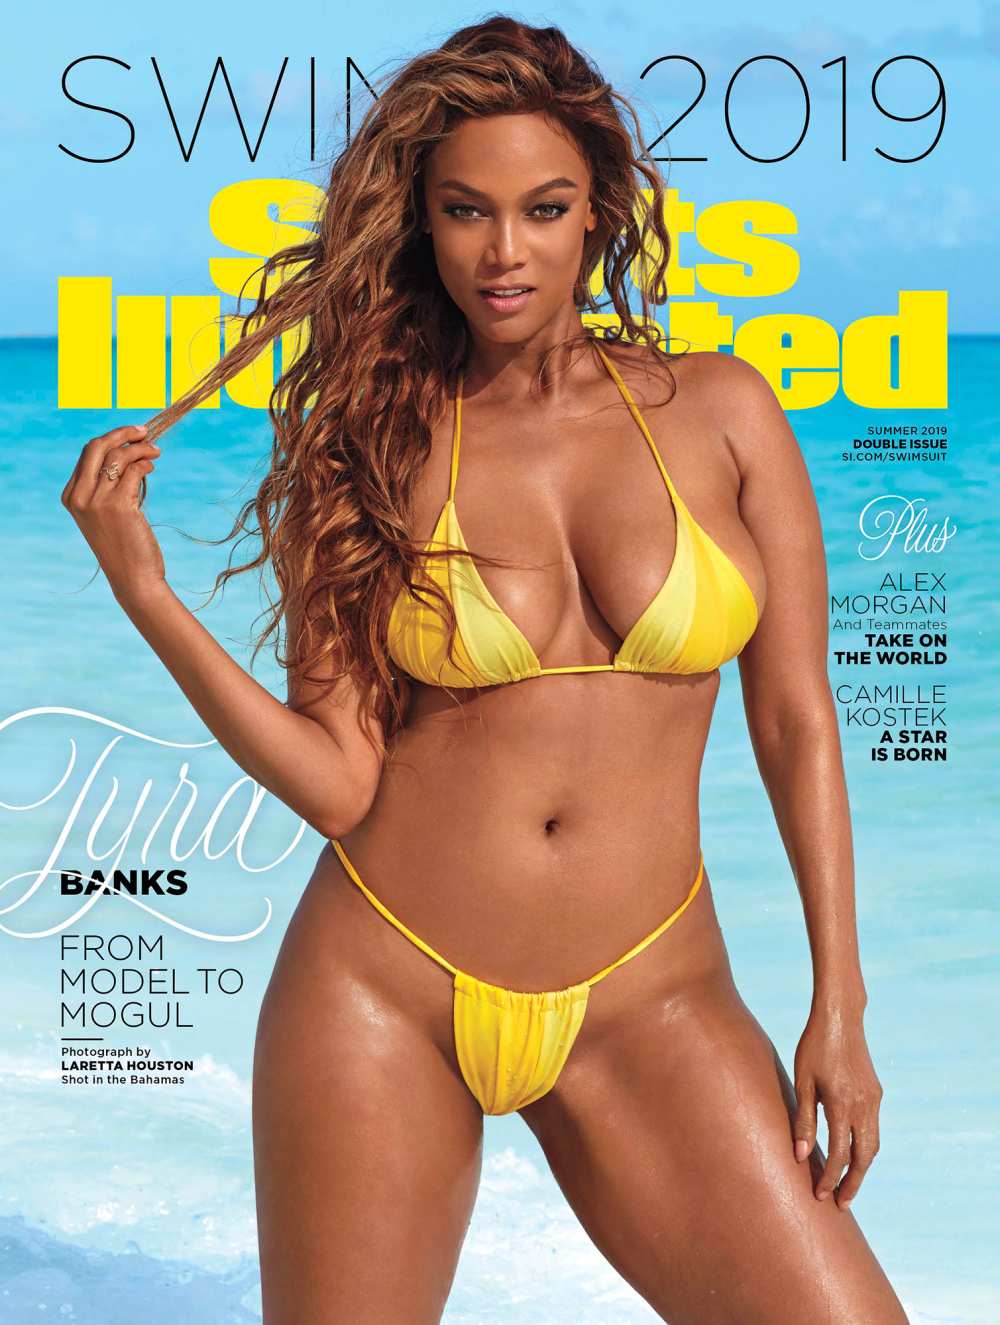 45-Year-Old Tyra Banks Revealed as 'Sports Illustrated Swim' Issue Cover Model